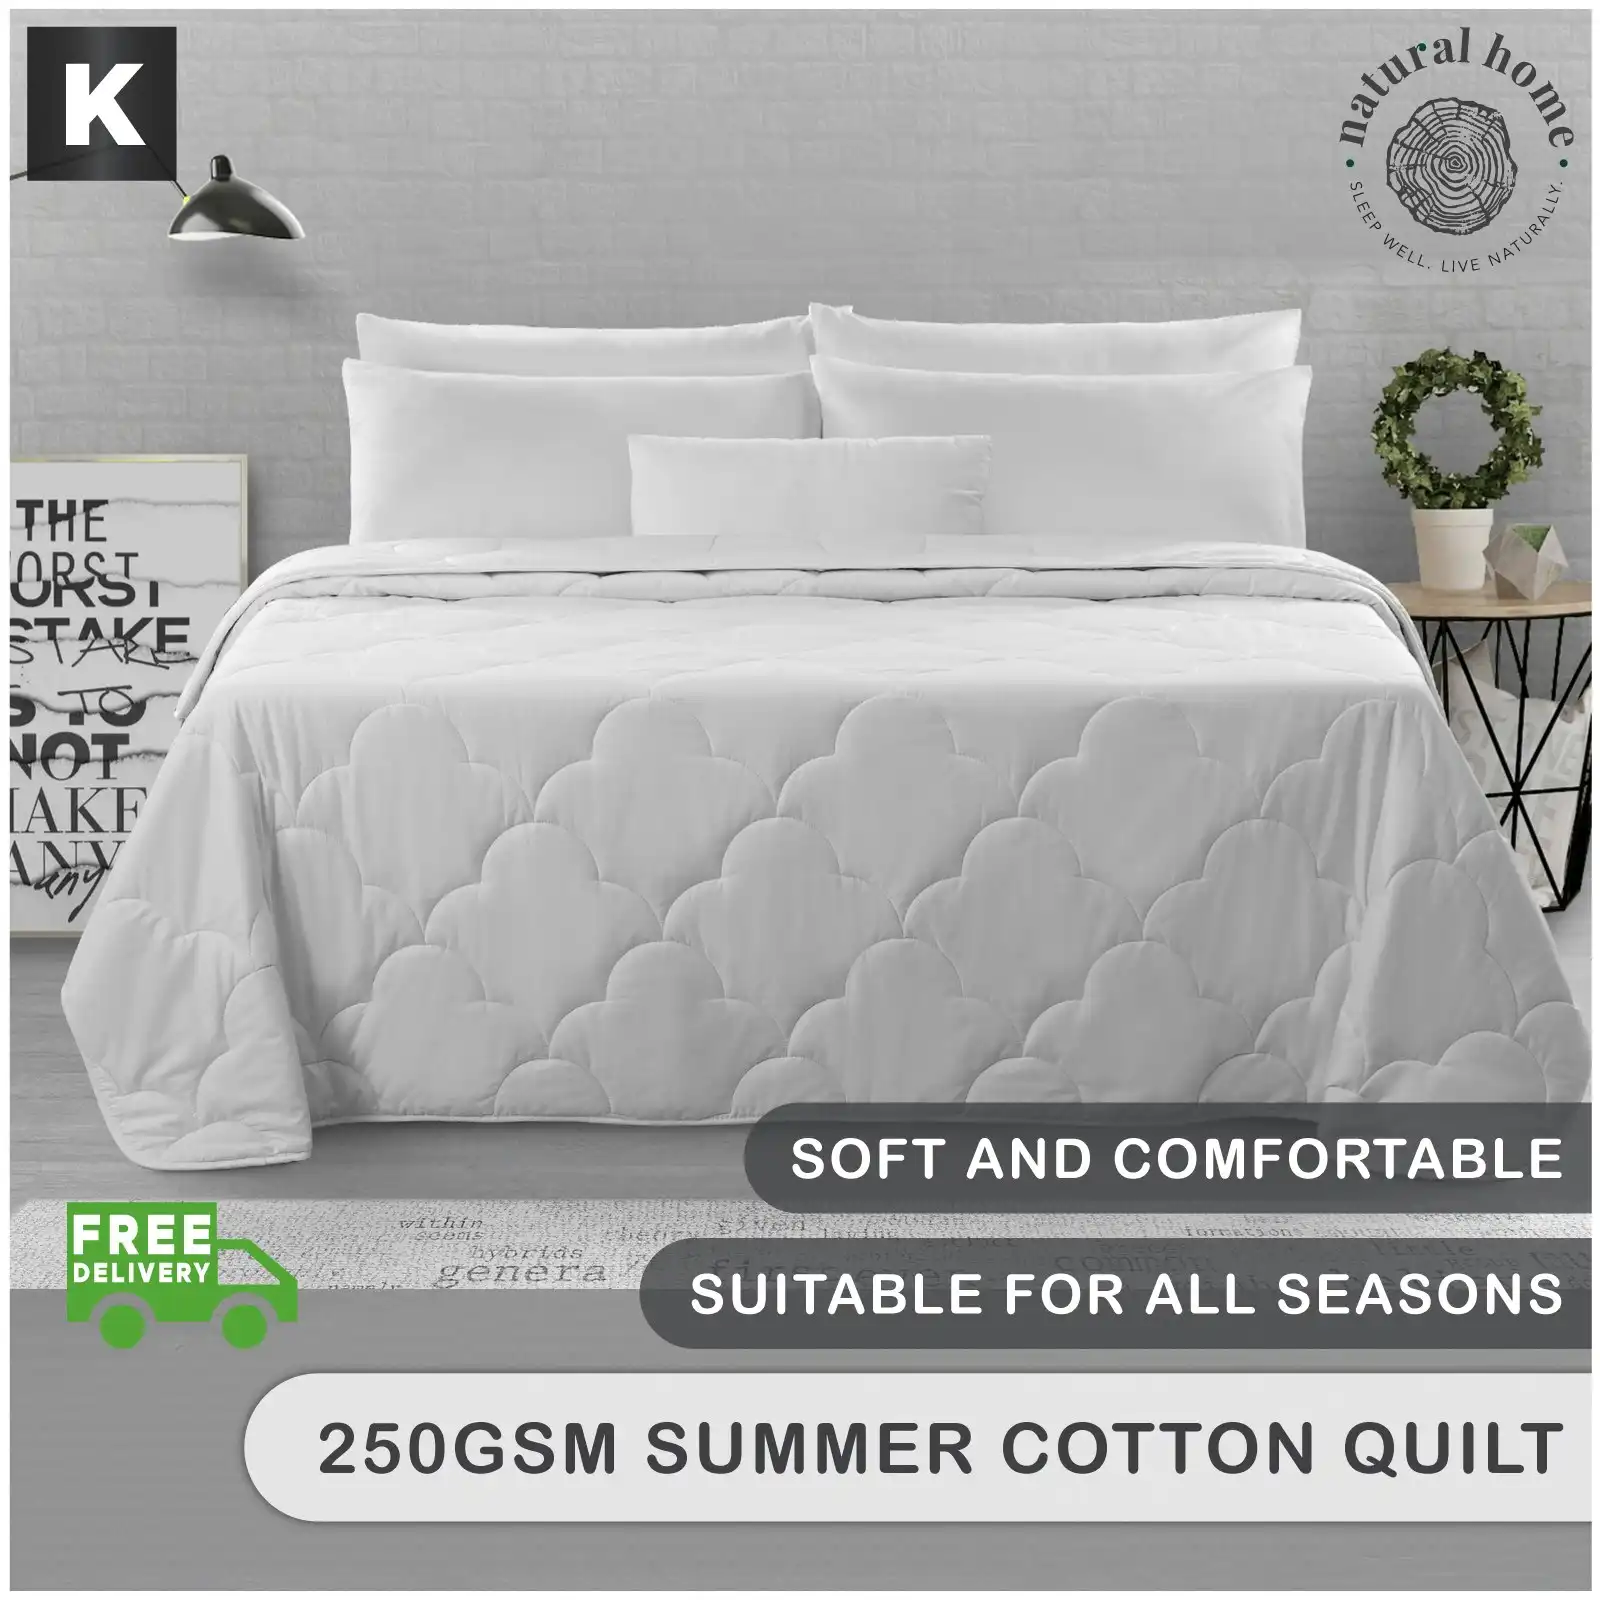 7007009 Natural Home Summer Cotton Quilt 250gsm - White - King Bed